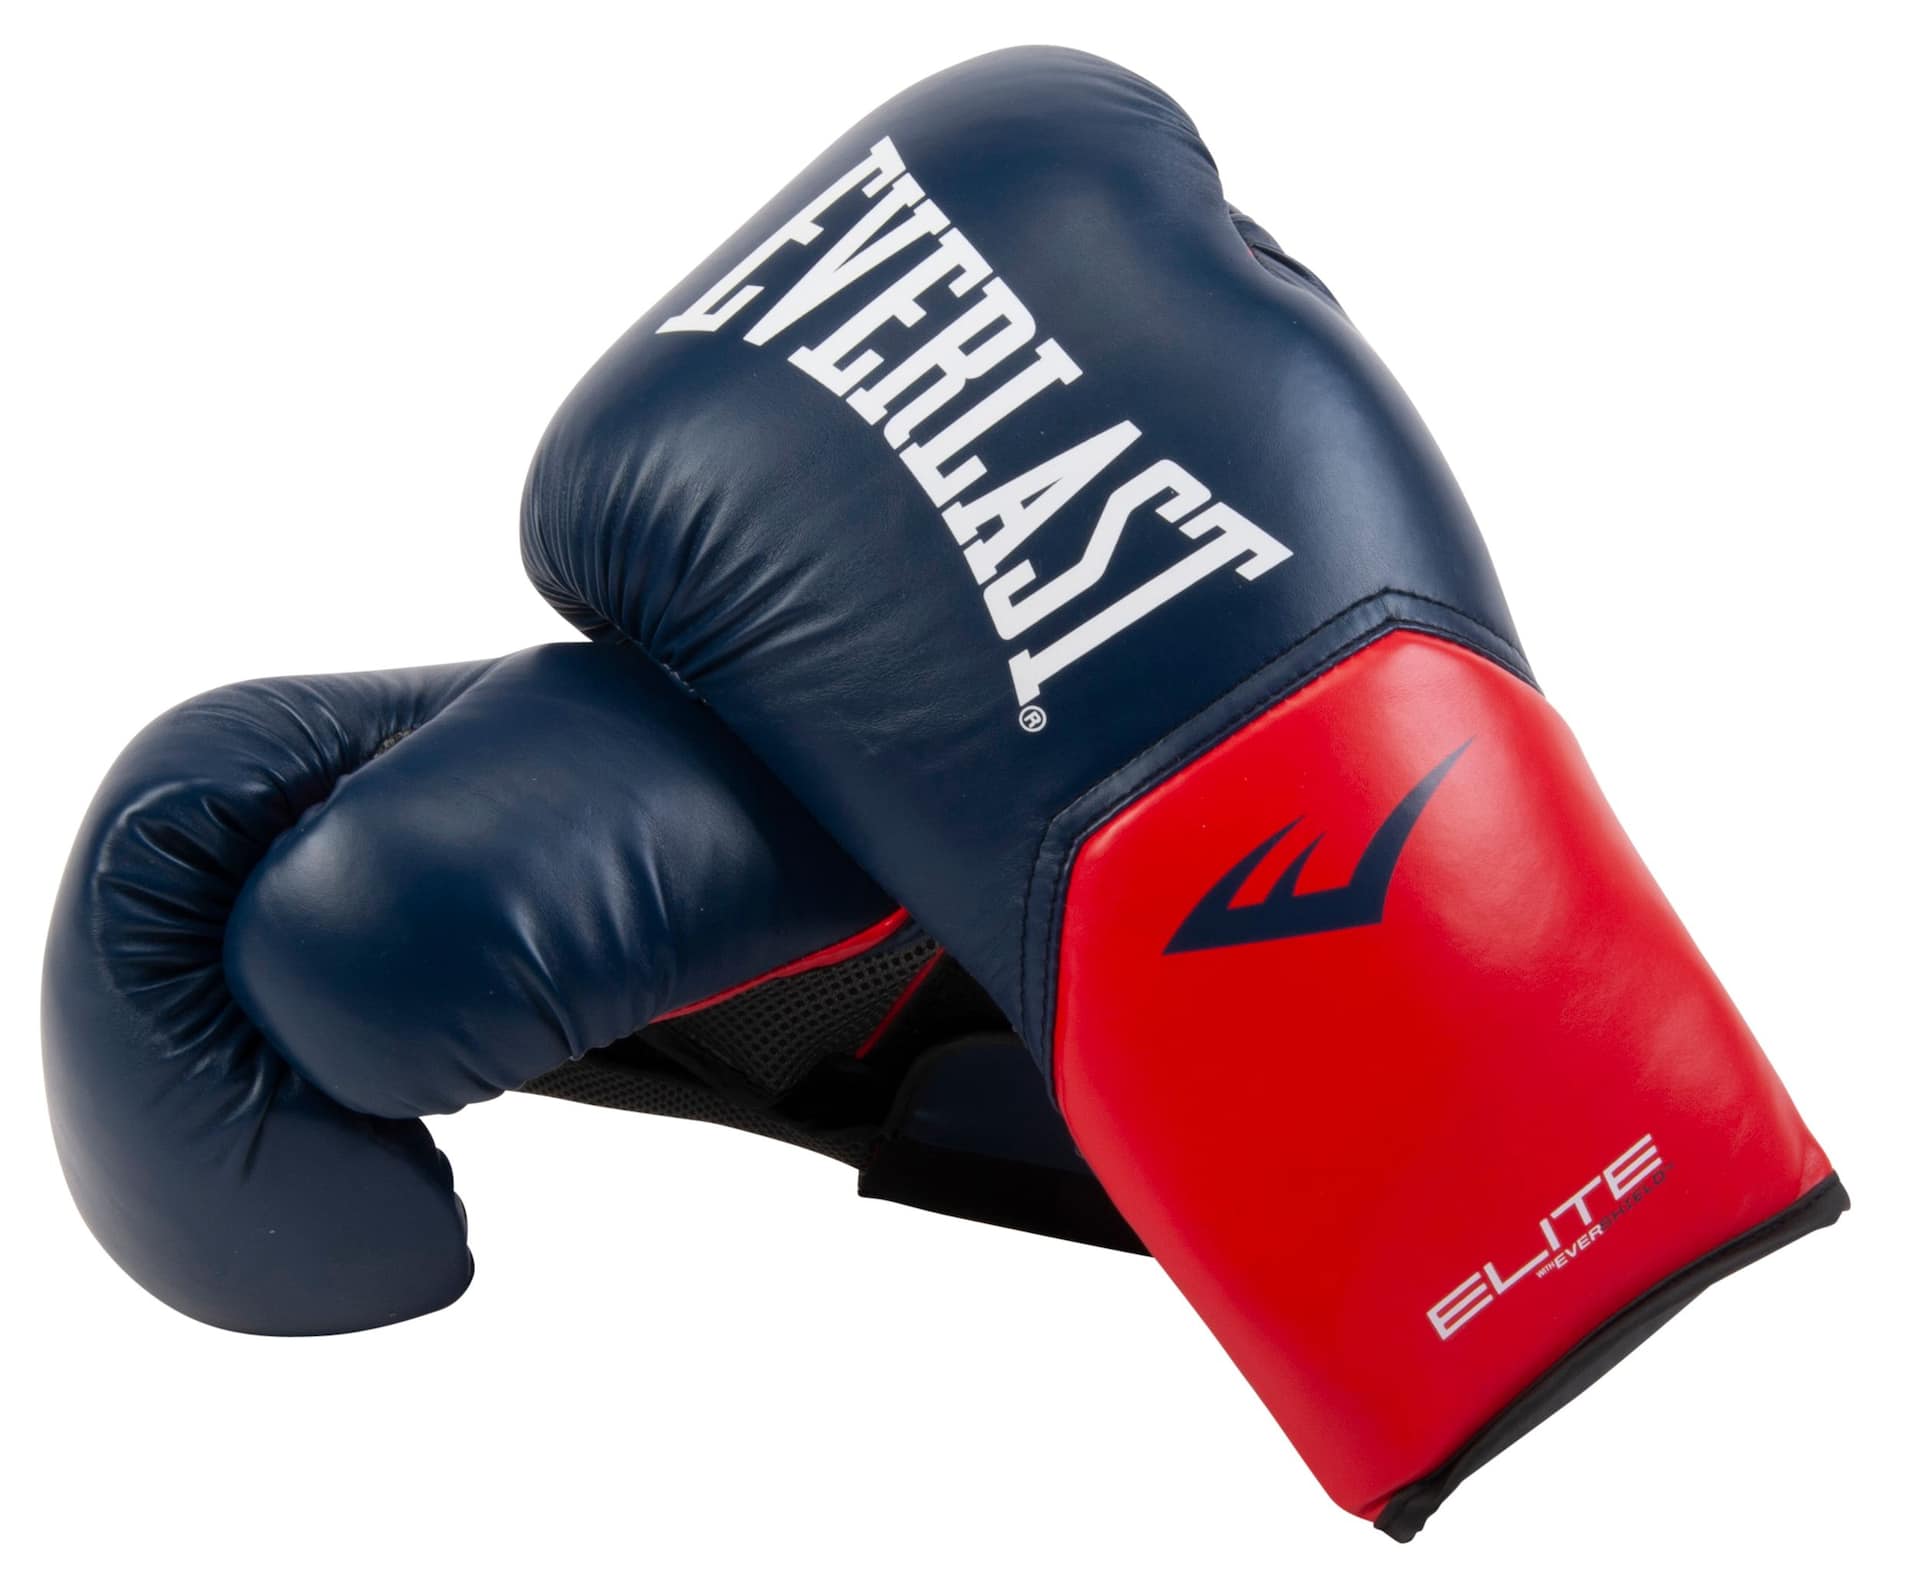 https://media-www.canadiantire.ca/product/playing/exercise/exercise-accessories/1841022/everlast-elite-2-0-14oz-navy-red-c743bdb2-3b0f-427e-b5c4-26ebada58756-jpgrendition.jpg